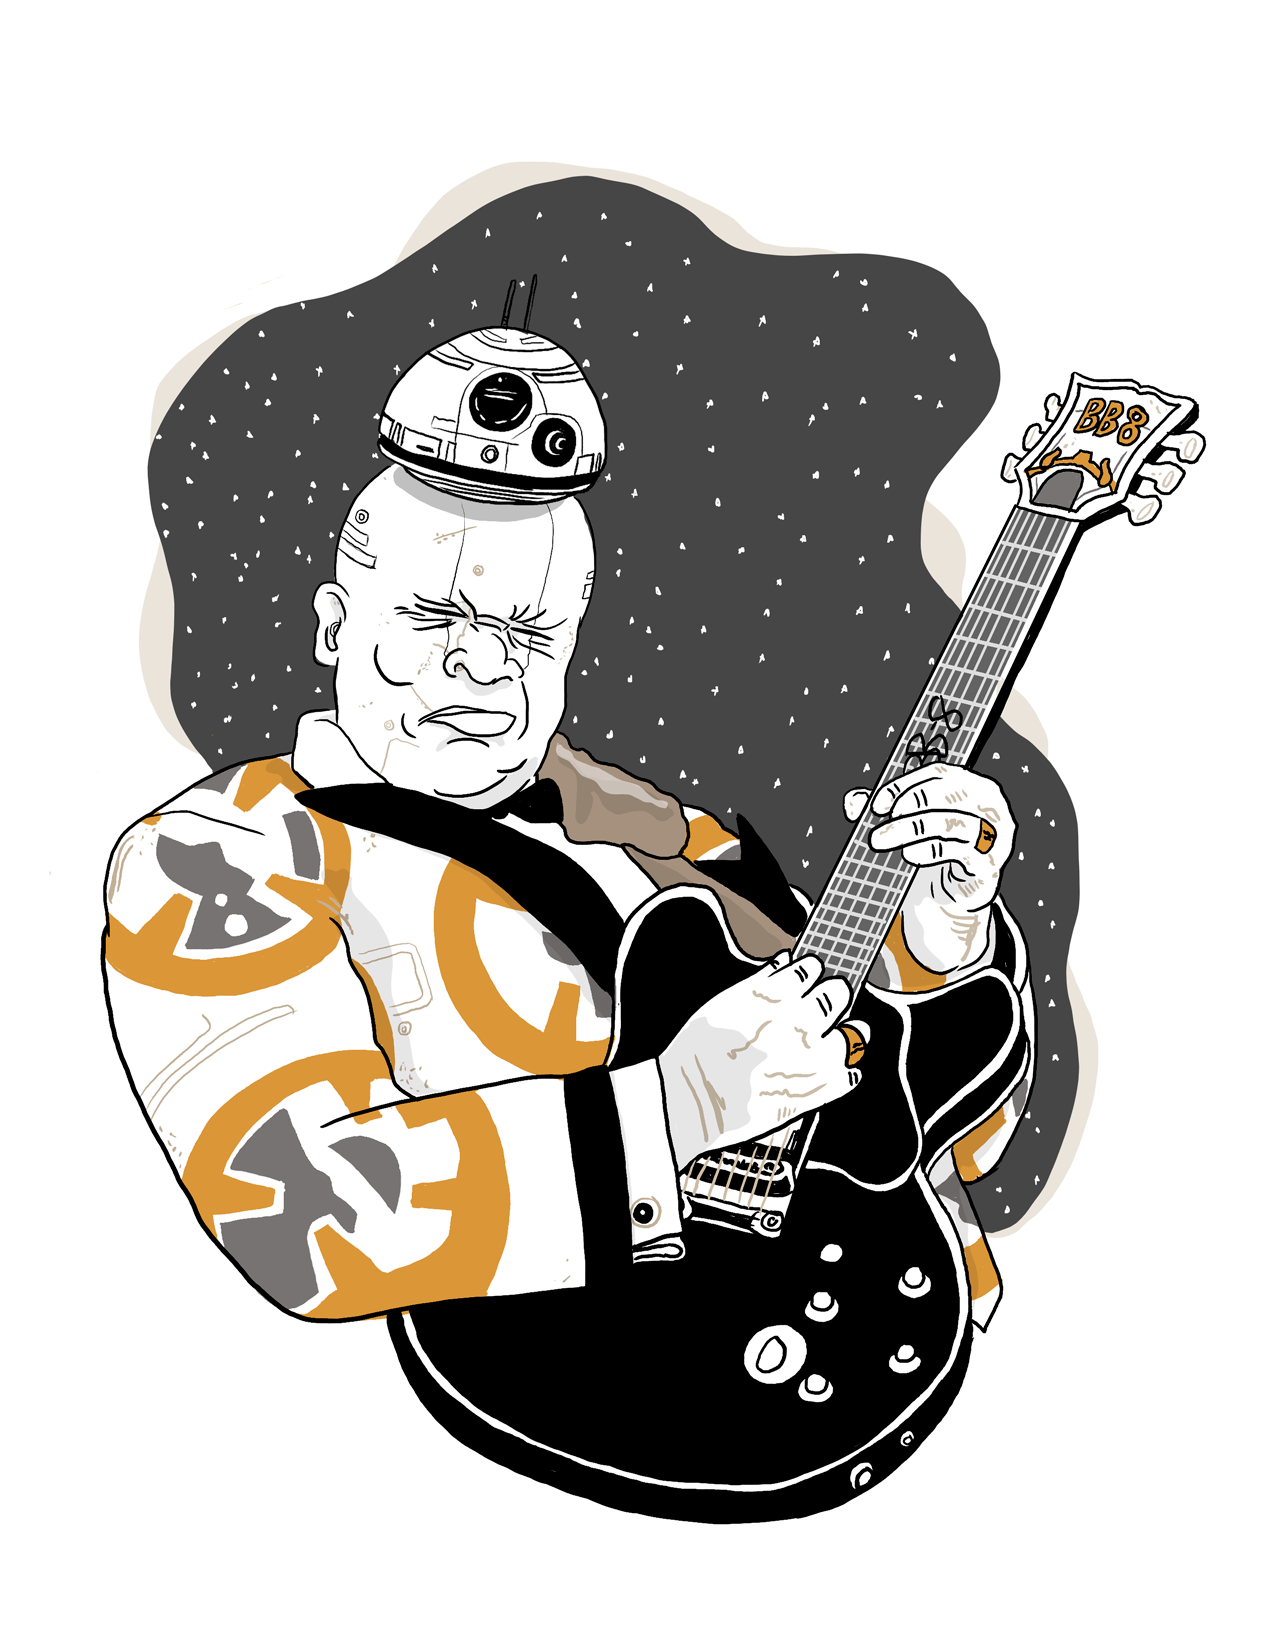 BB-8 King! By Shawn Bowers, of Tumblr!